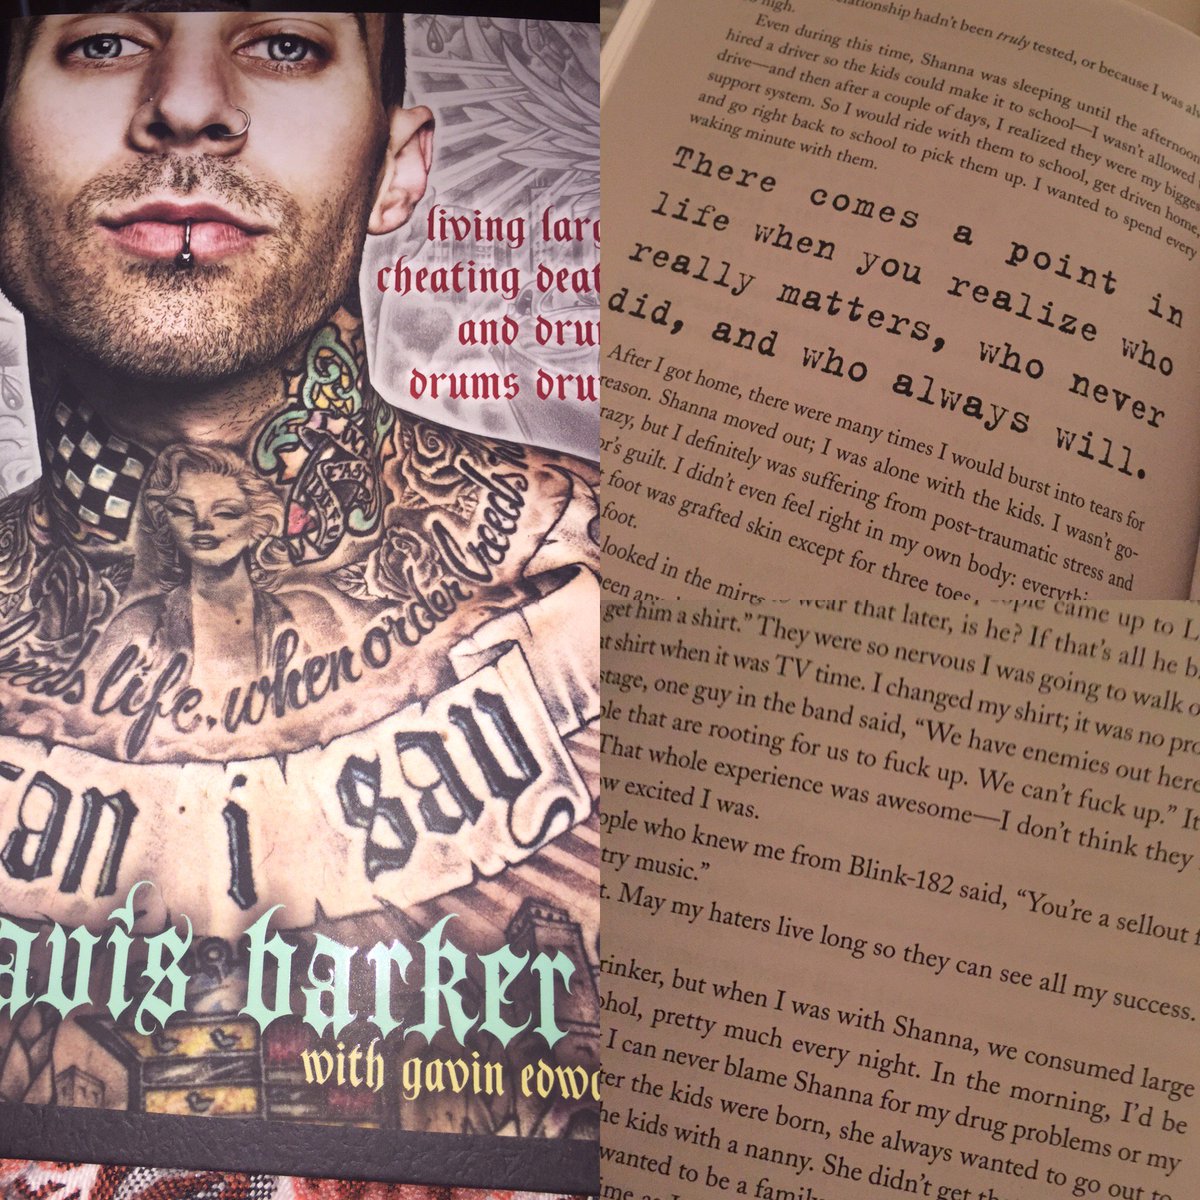 RT @starchica21: @travisbarker I laughed, I cried…it was amazing. Thank you for sharing your story with us…such a blessing to read https://…